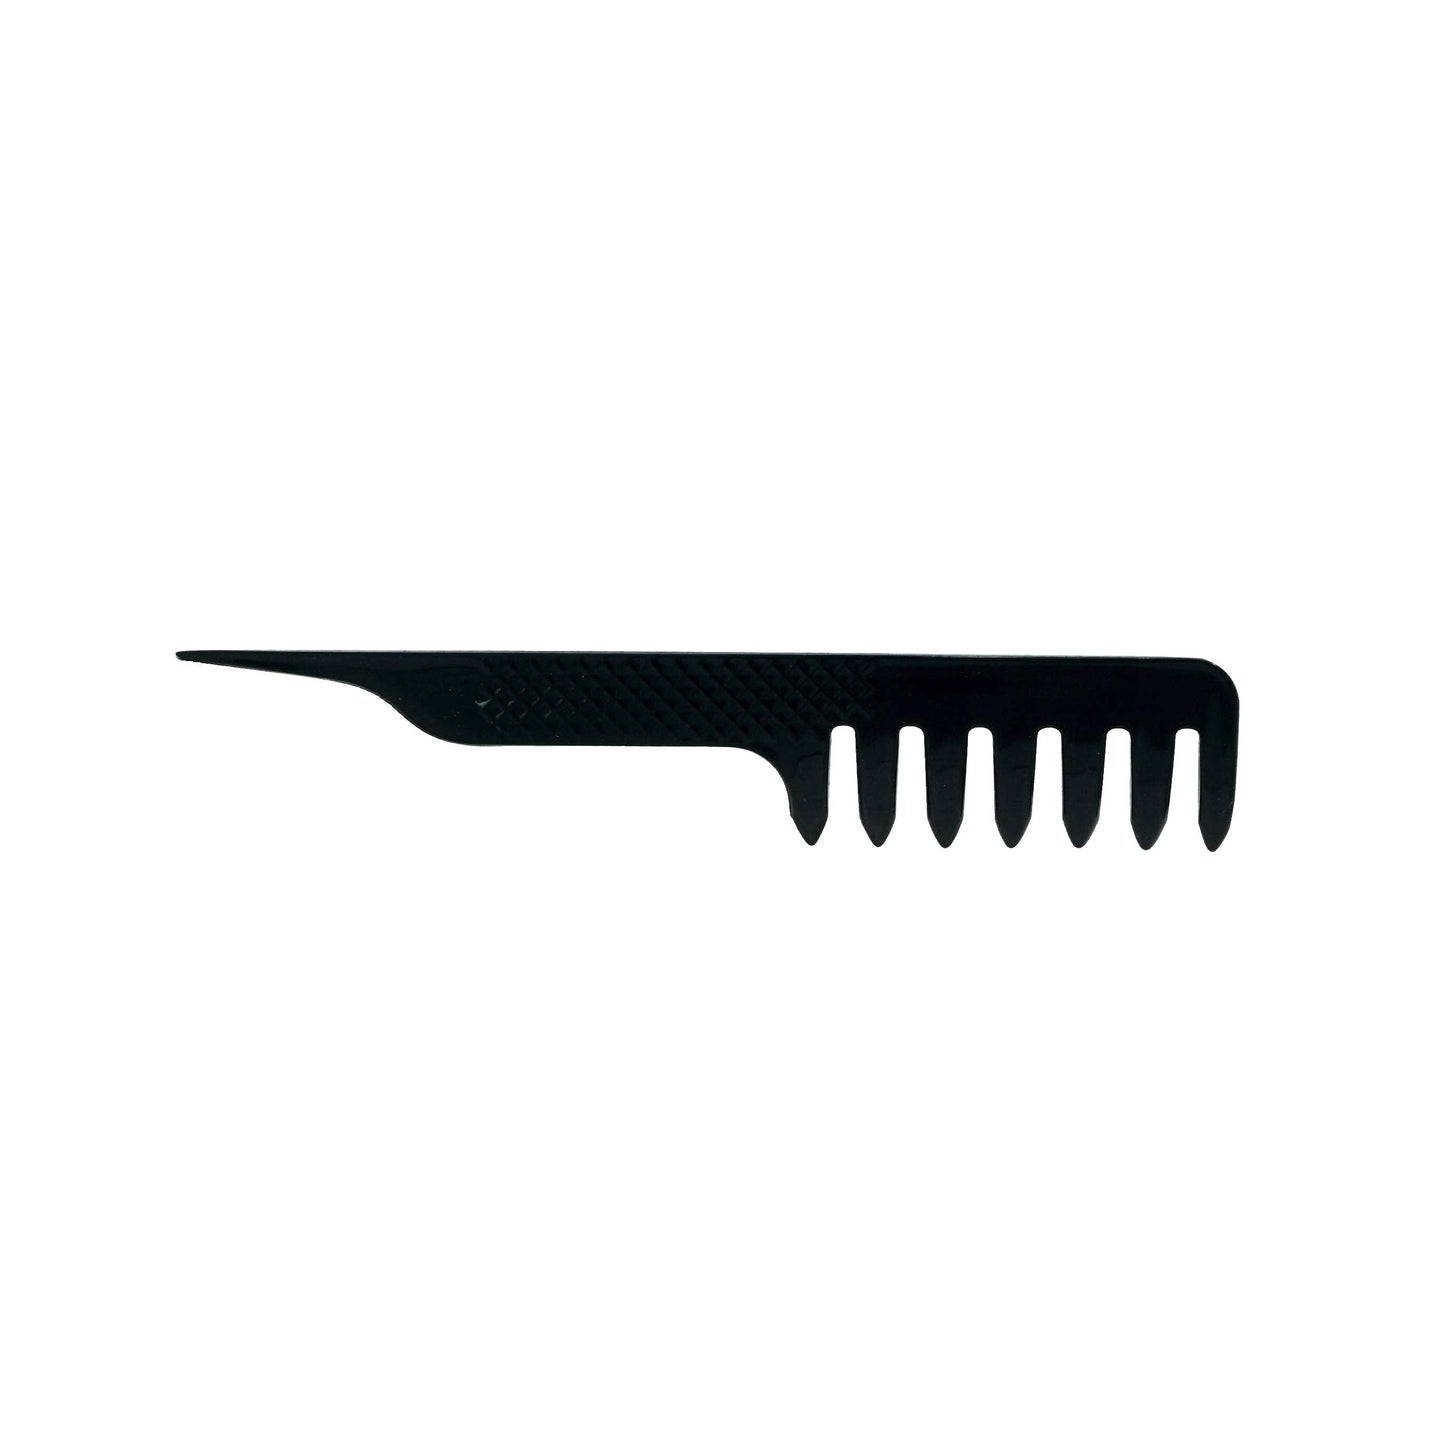 Pegasus 509_B3, 7in Blow Dry Comb, Handmade, Seamless, Smooth Edges, Anti Static, Heat and Chemically Resistant, Wet Hair, Everyday Grooming Comb | Peines de goma dura - Black